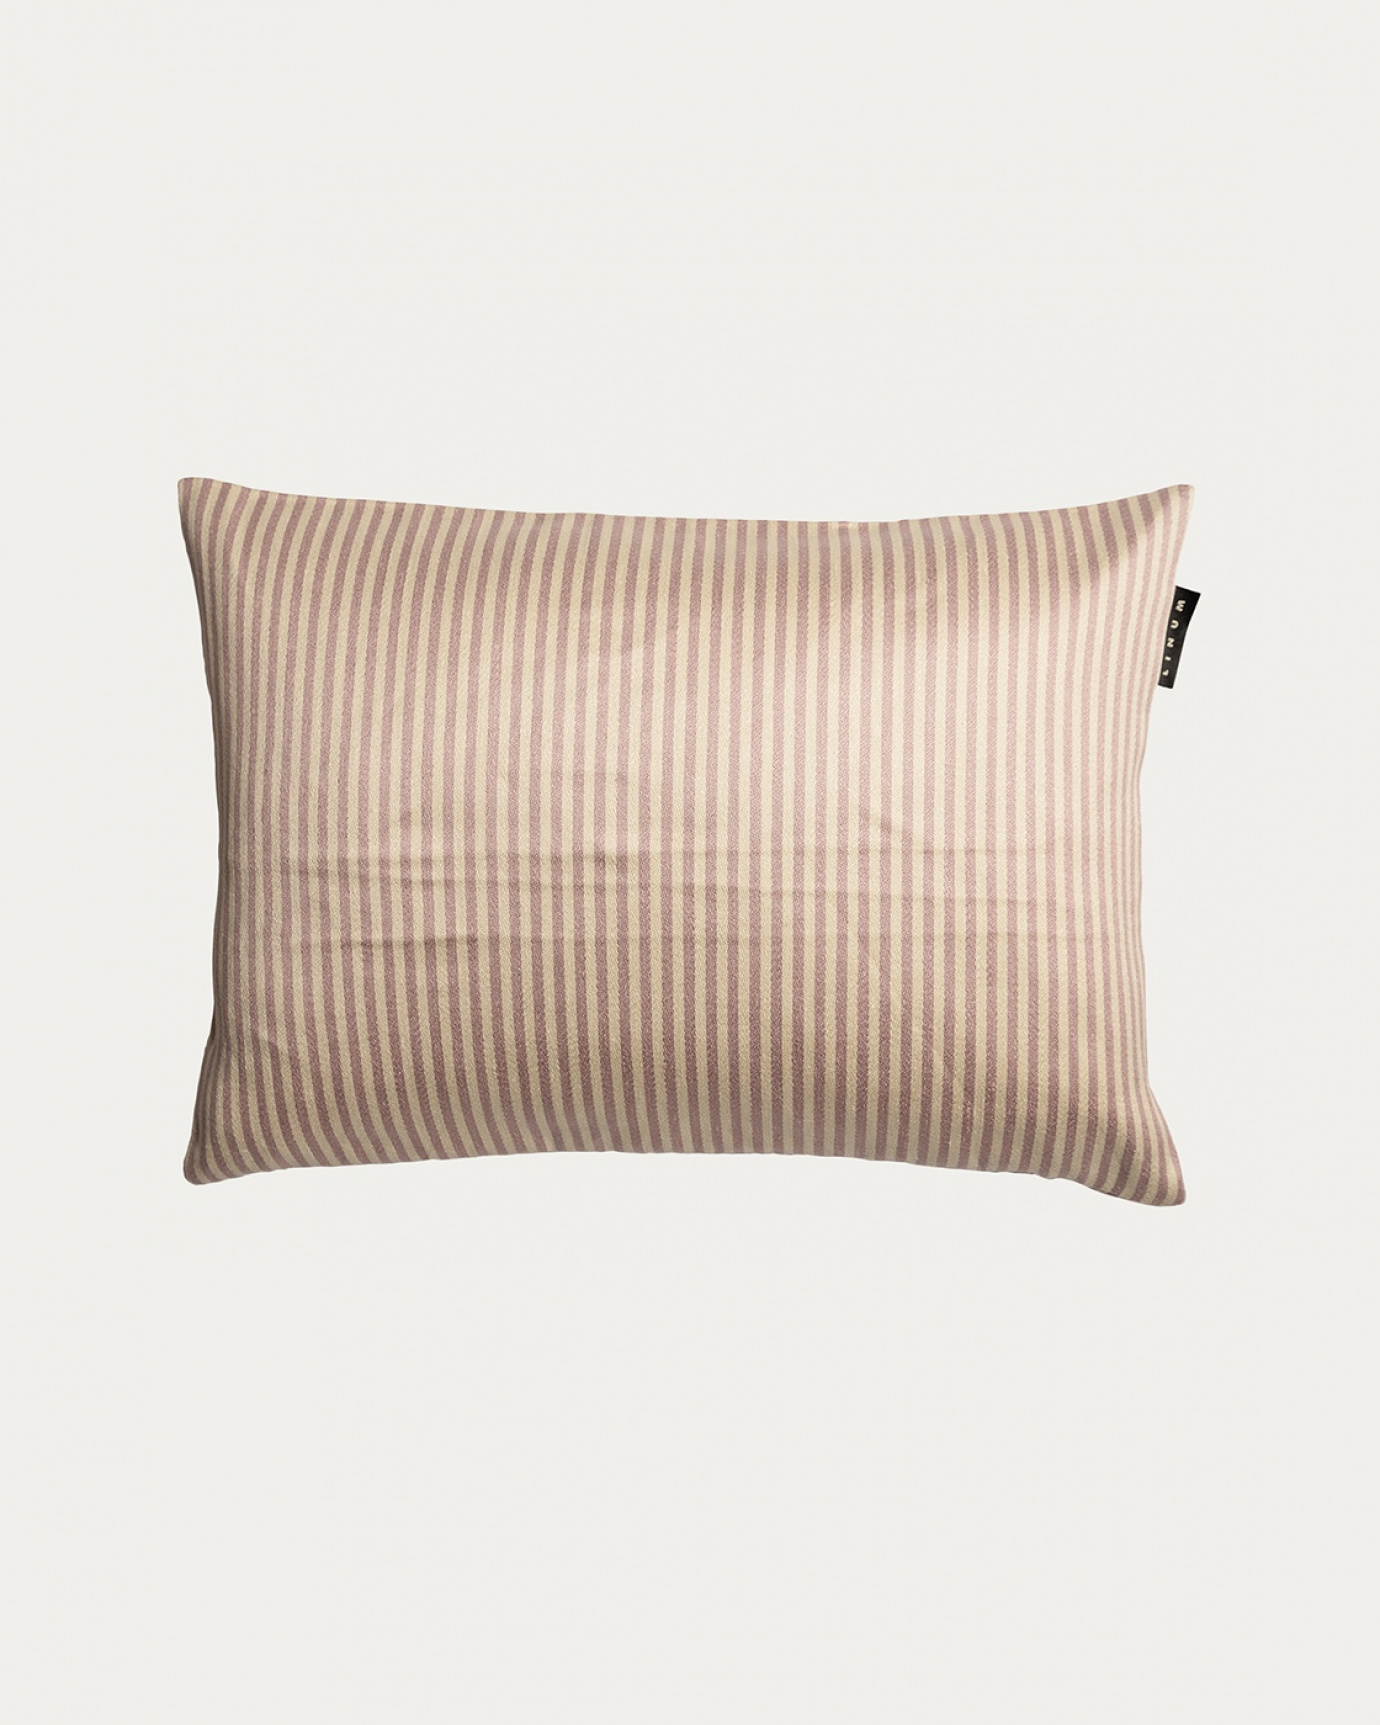 Product image dusty pink CALCIO cushion cover with thin stripes of 77% linen and 23% cotton from LINUM DESIGN. Size 35x50 cm.